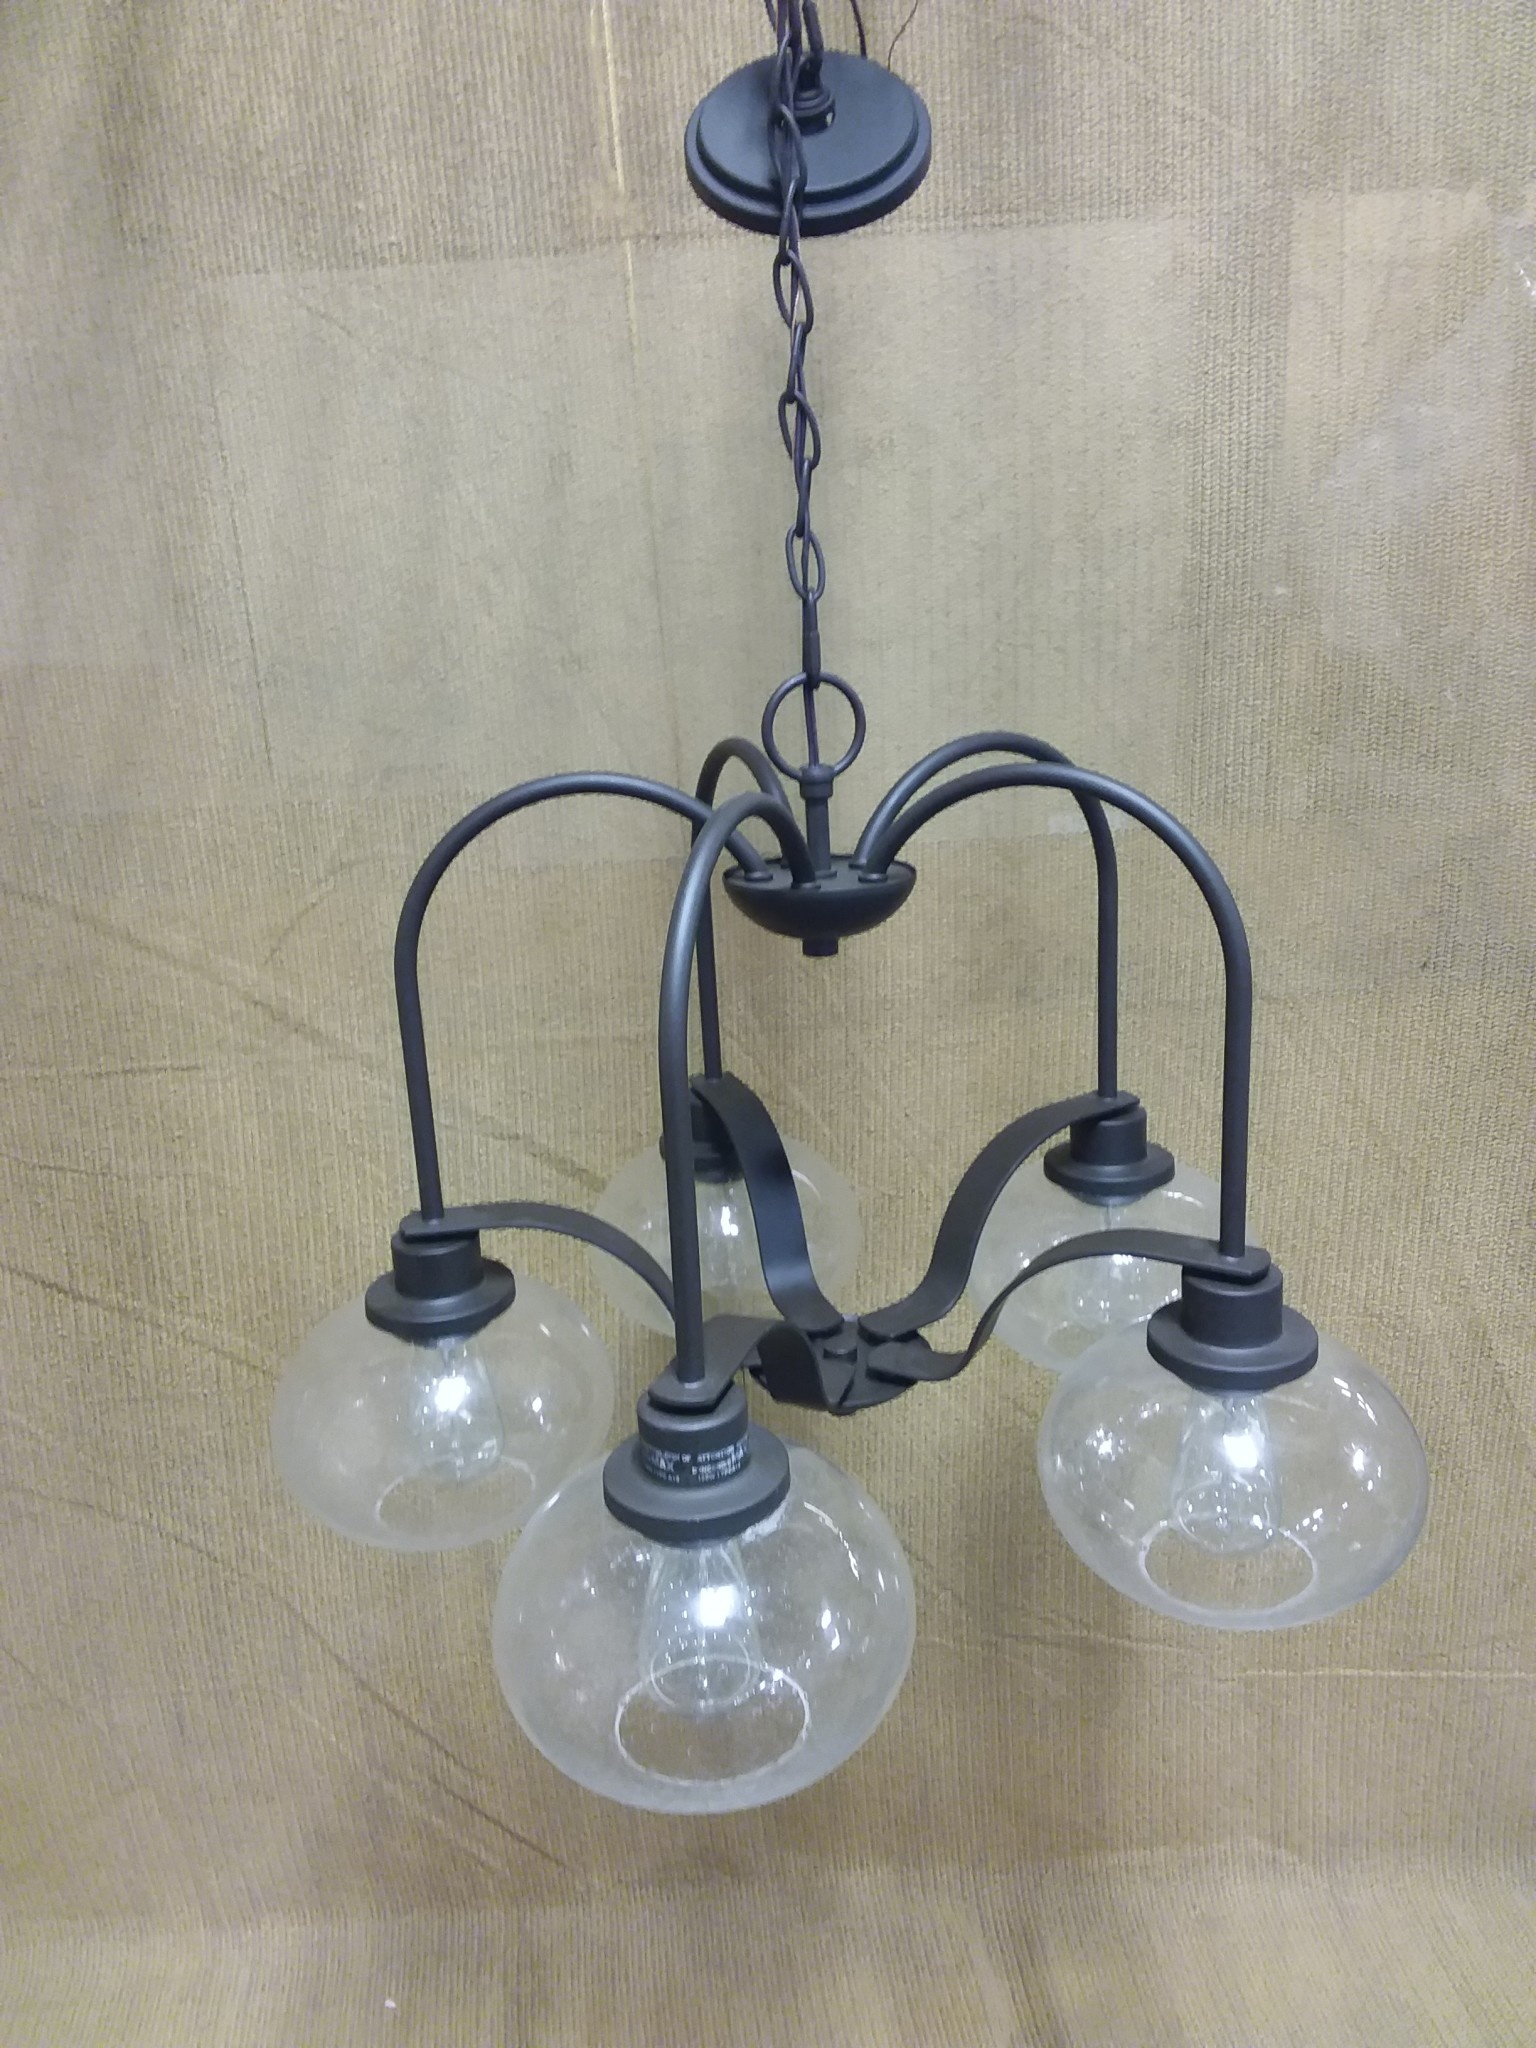 5 bulb chandelier with round shades - Habitat for Humanity ReStore